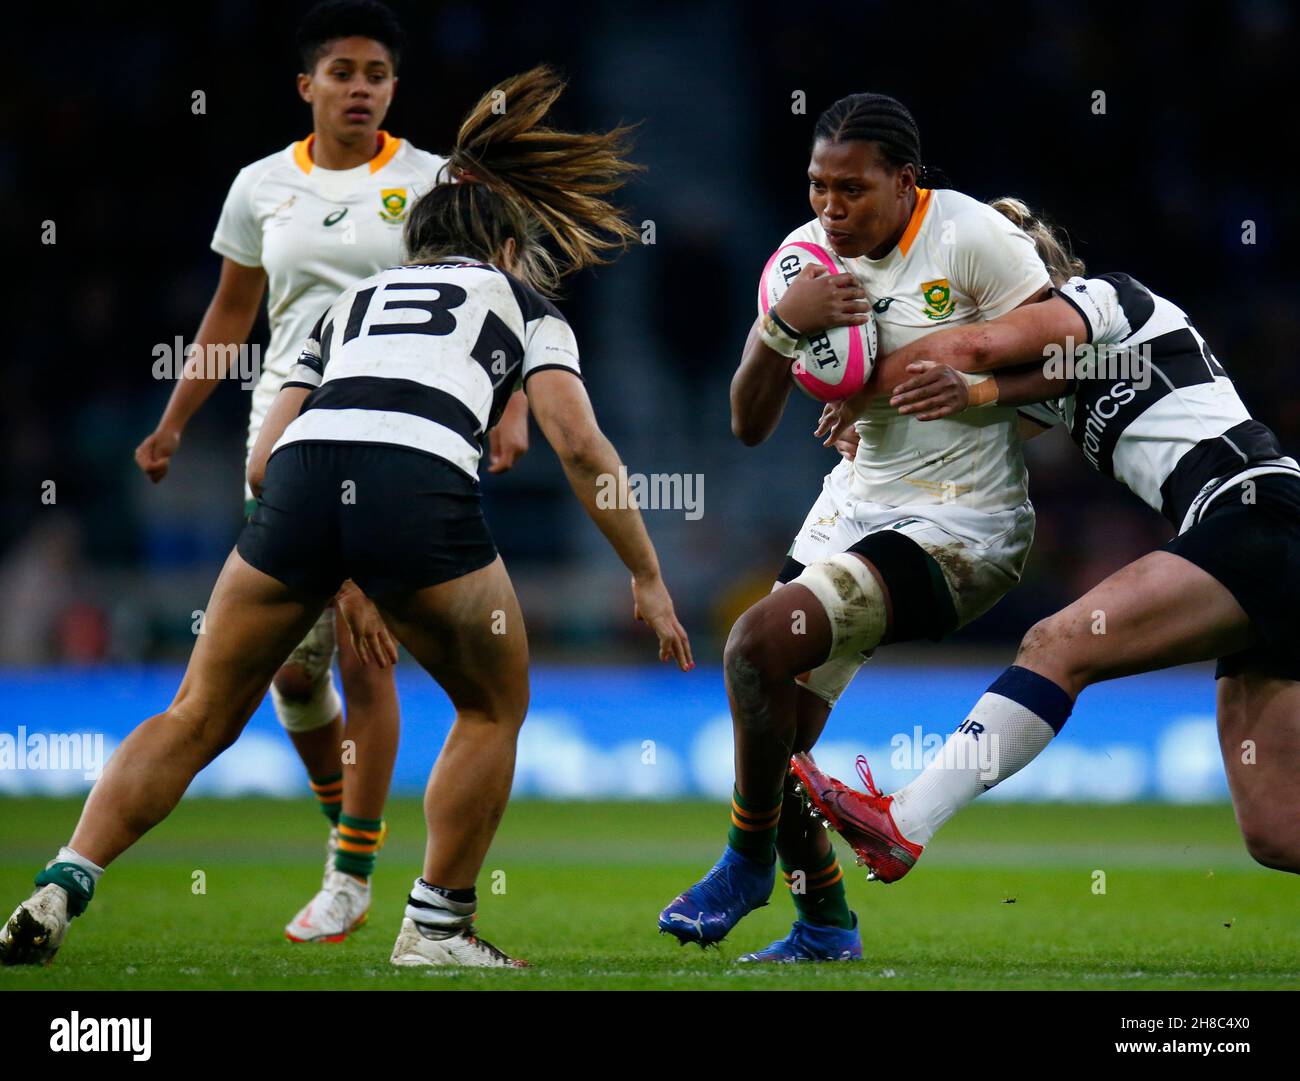 LONDON, ENGLAND - NOVEMBER  27:  Sinazo Mcatshulwa (DHL WP)of SpringBox Women in action during The Killik Cup match between Barbarians Women and Sprin Stock Photo